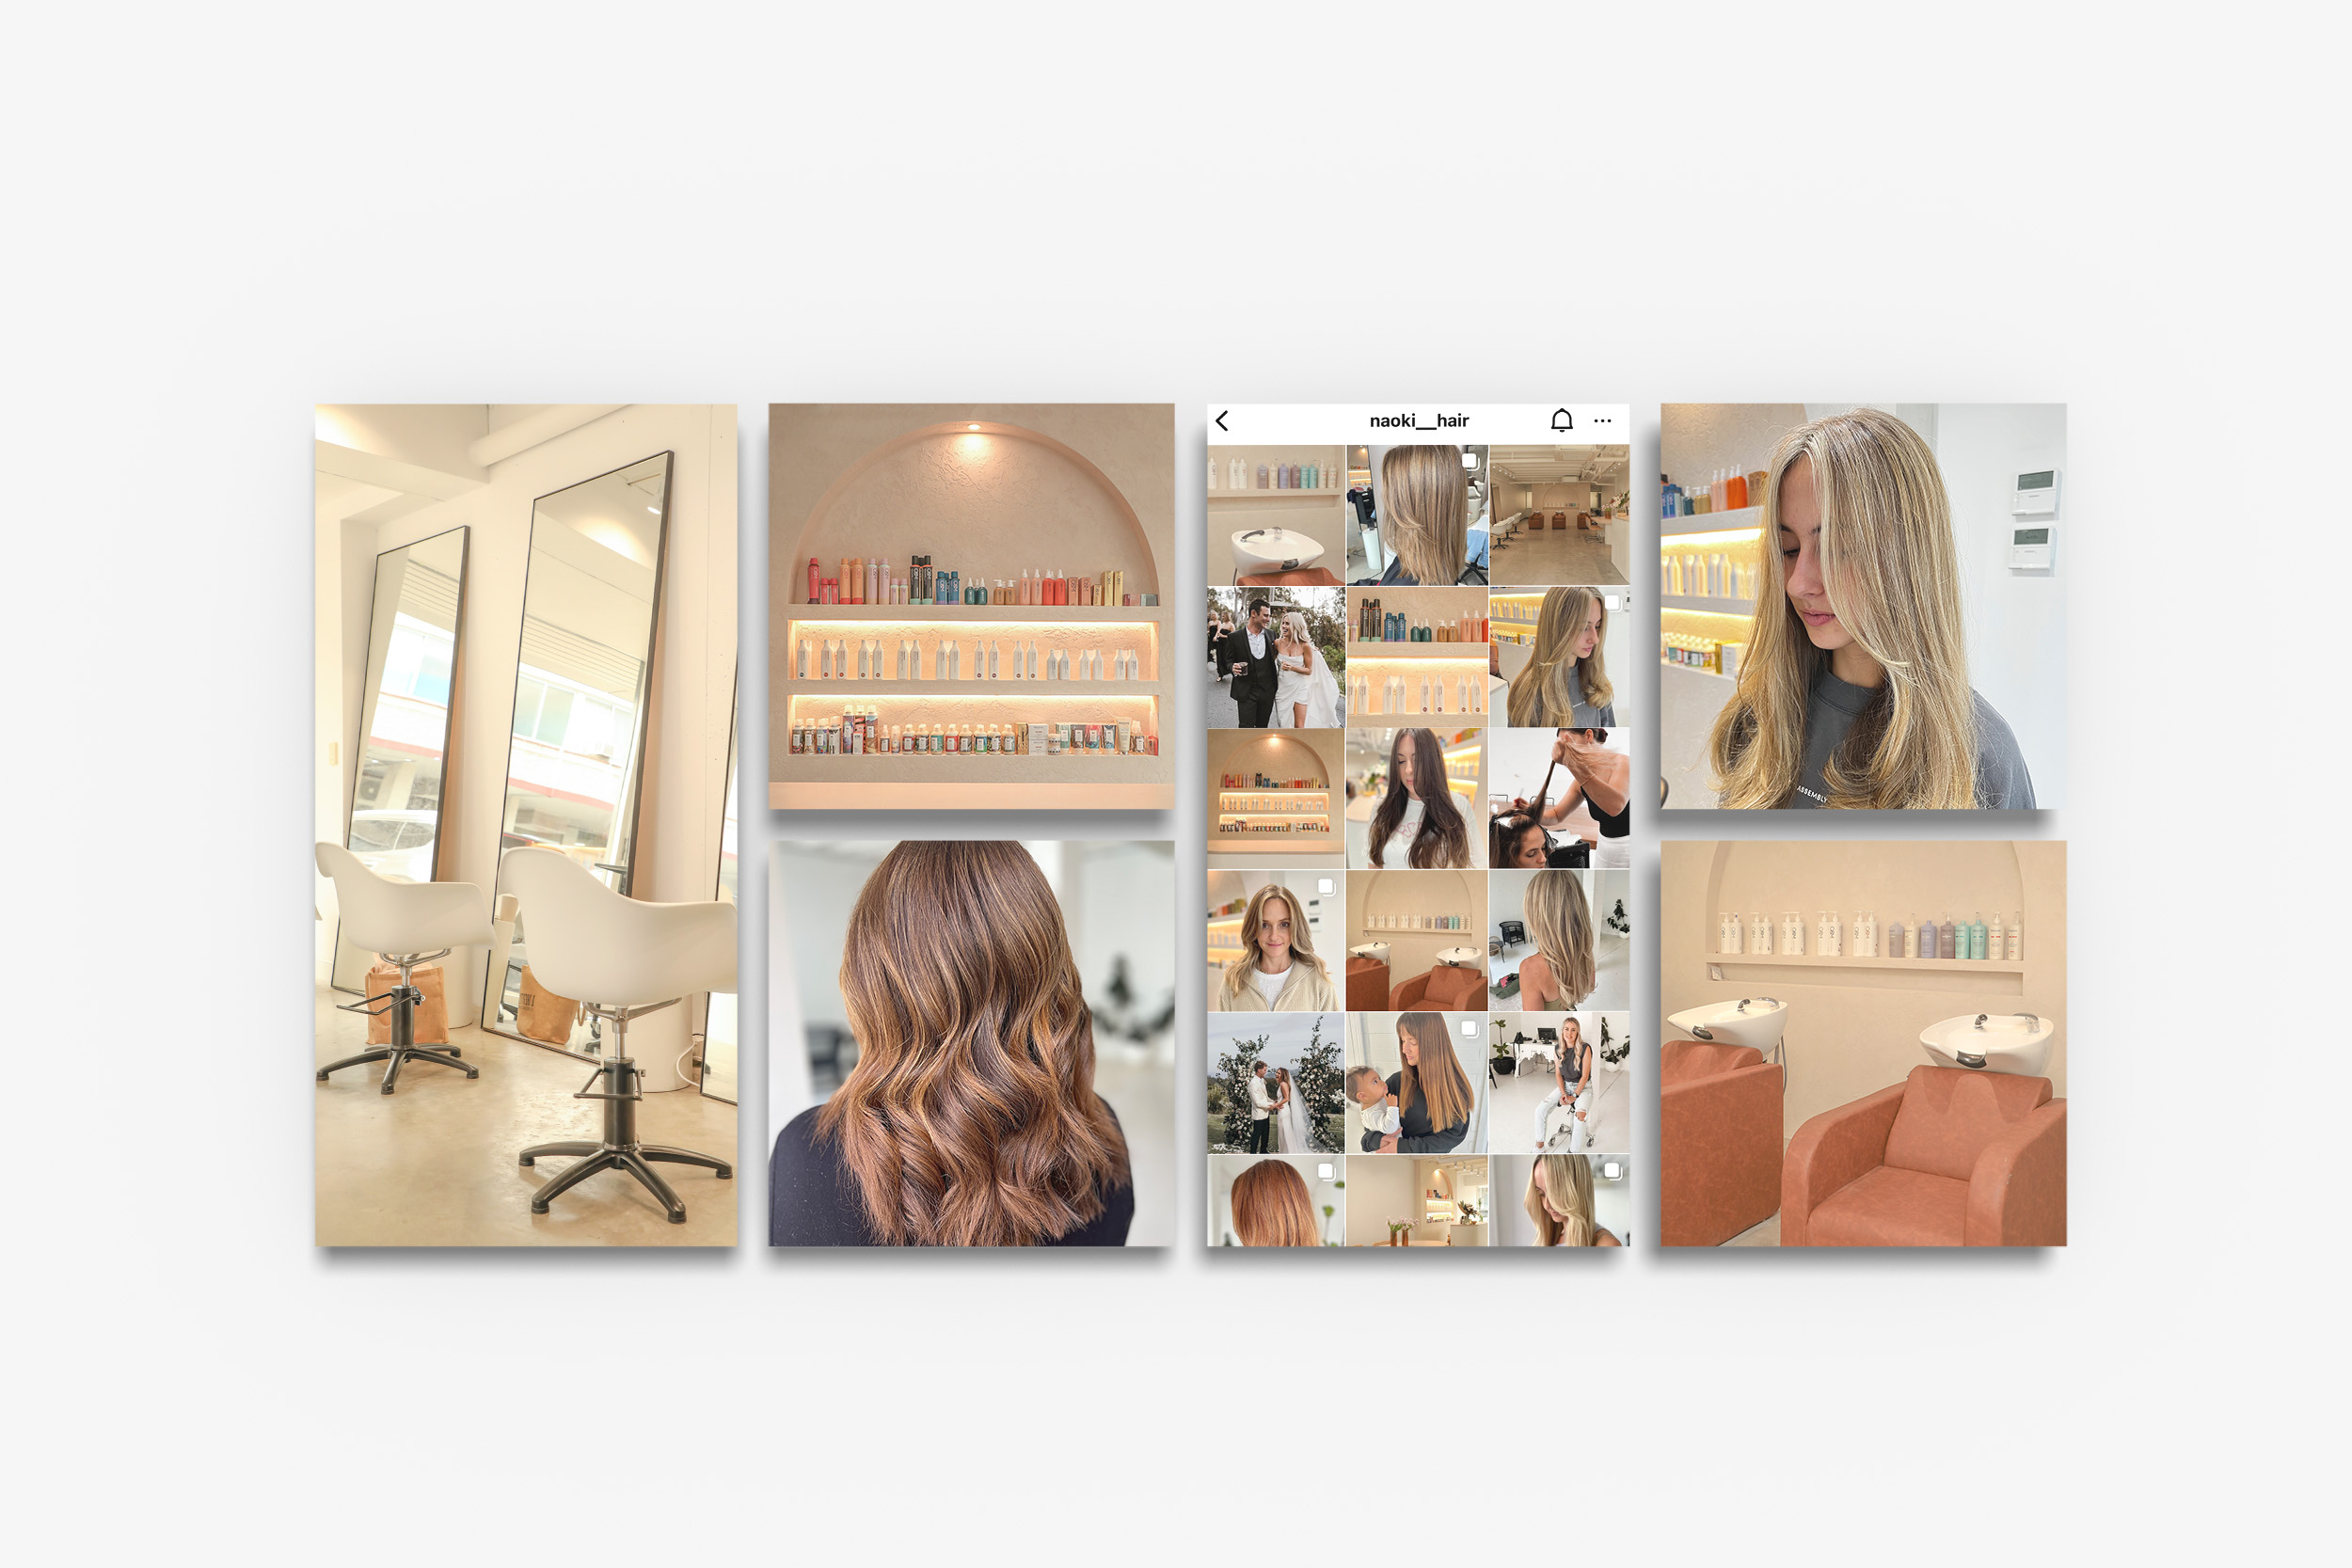 Instagram grid of s hair studio images to showcase the hairdressing salon